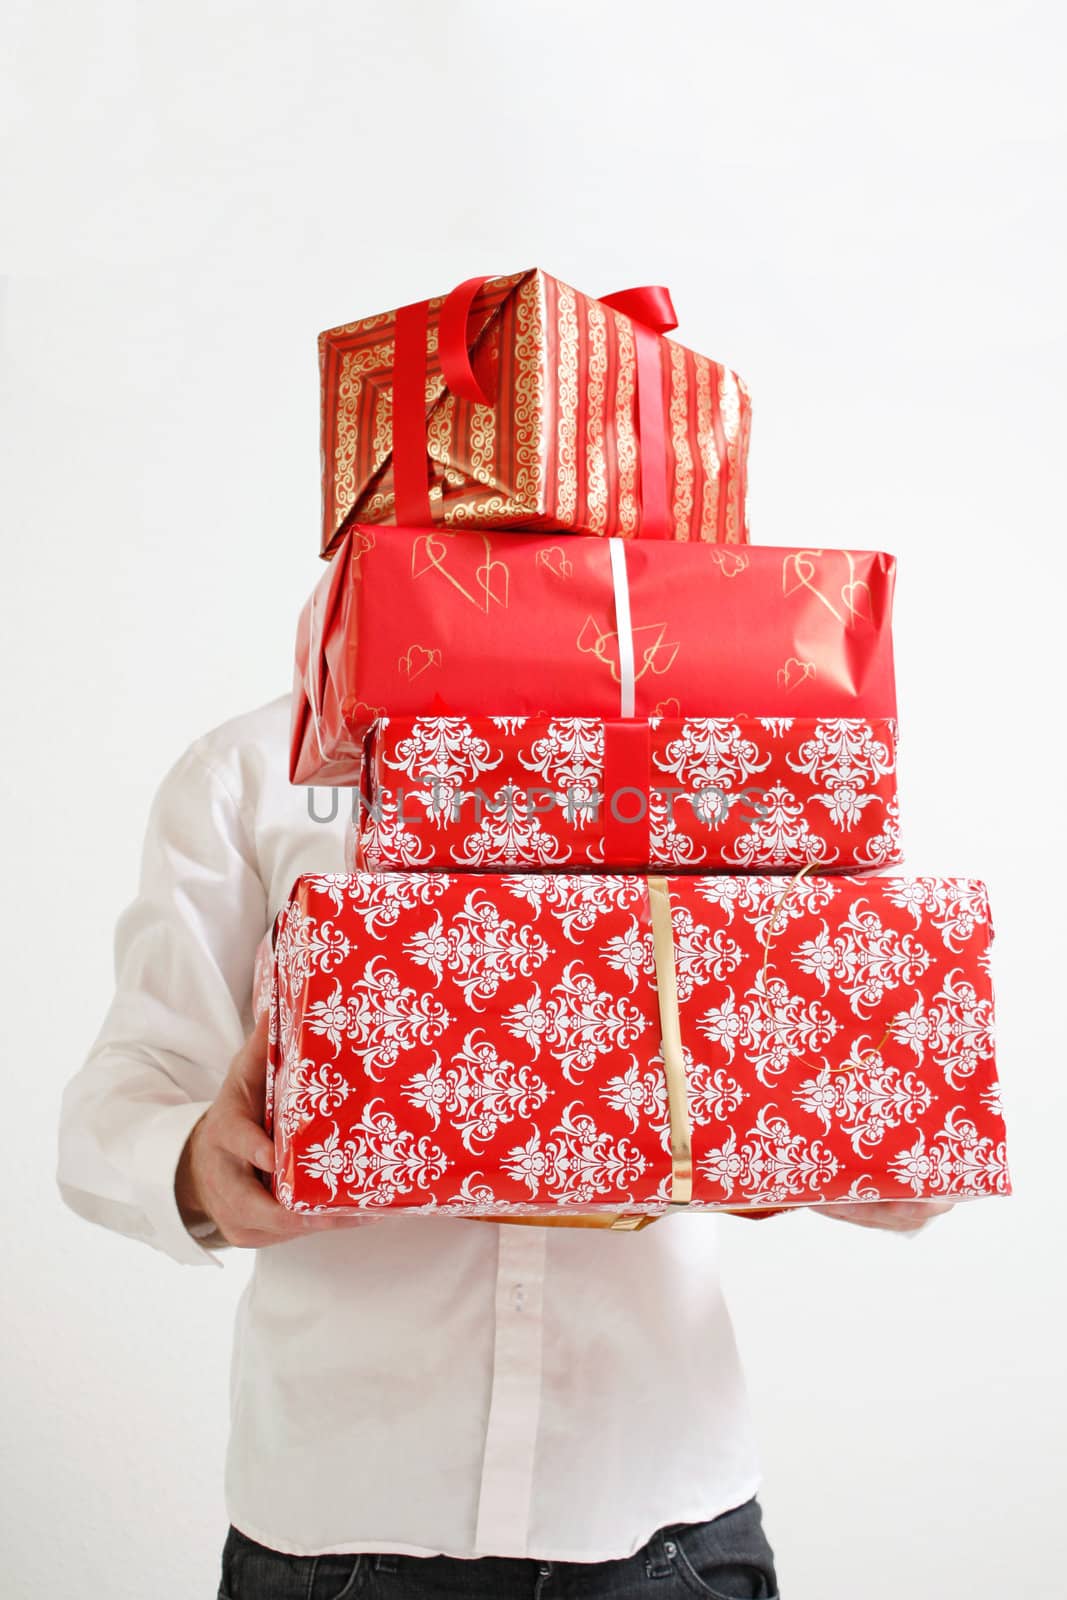 Presenting alot of gifts by leeser